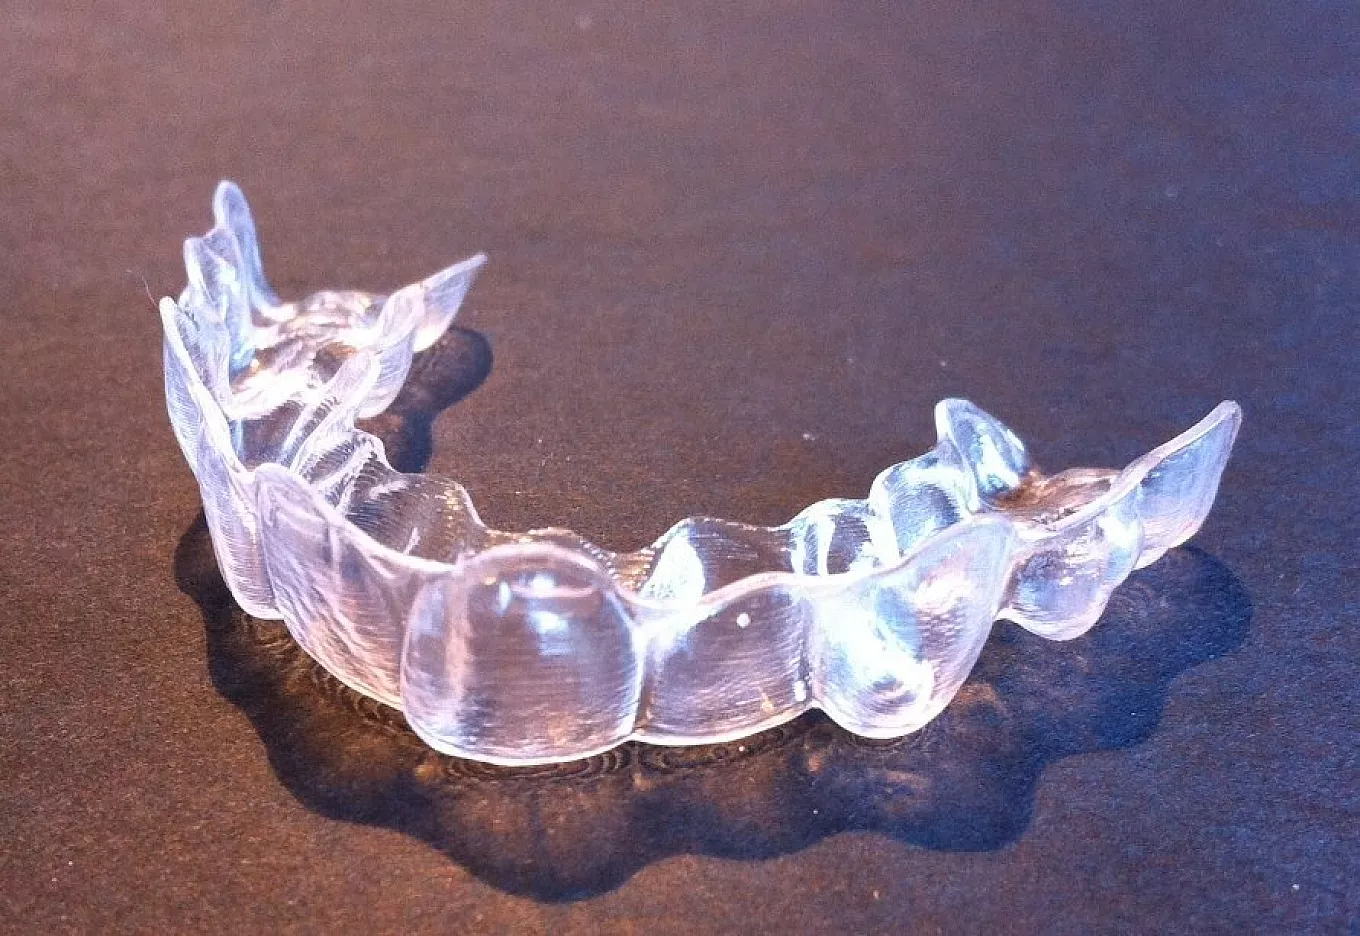 Can I Get Invisalign Without an Orthodontist?